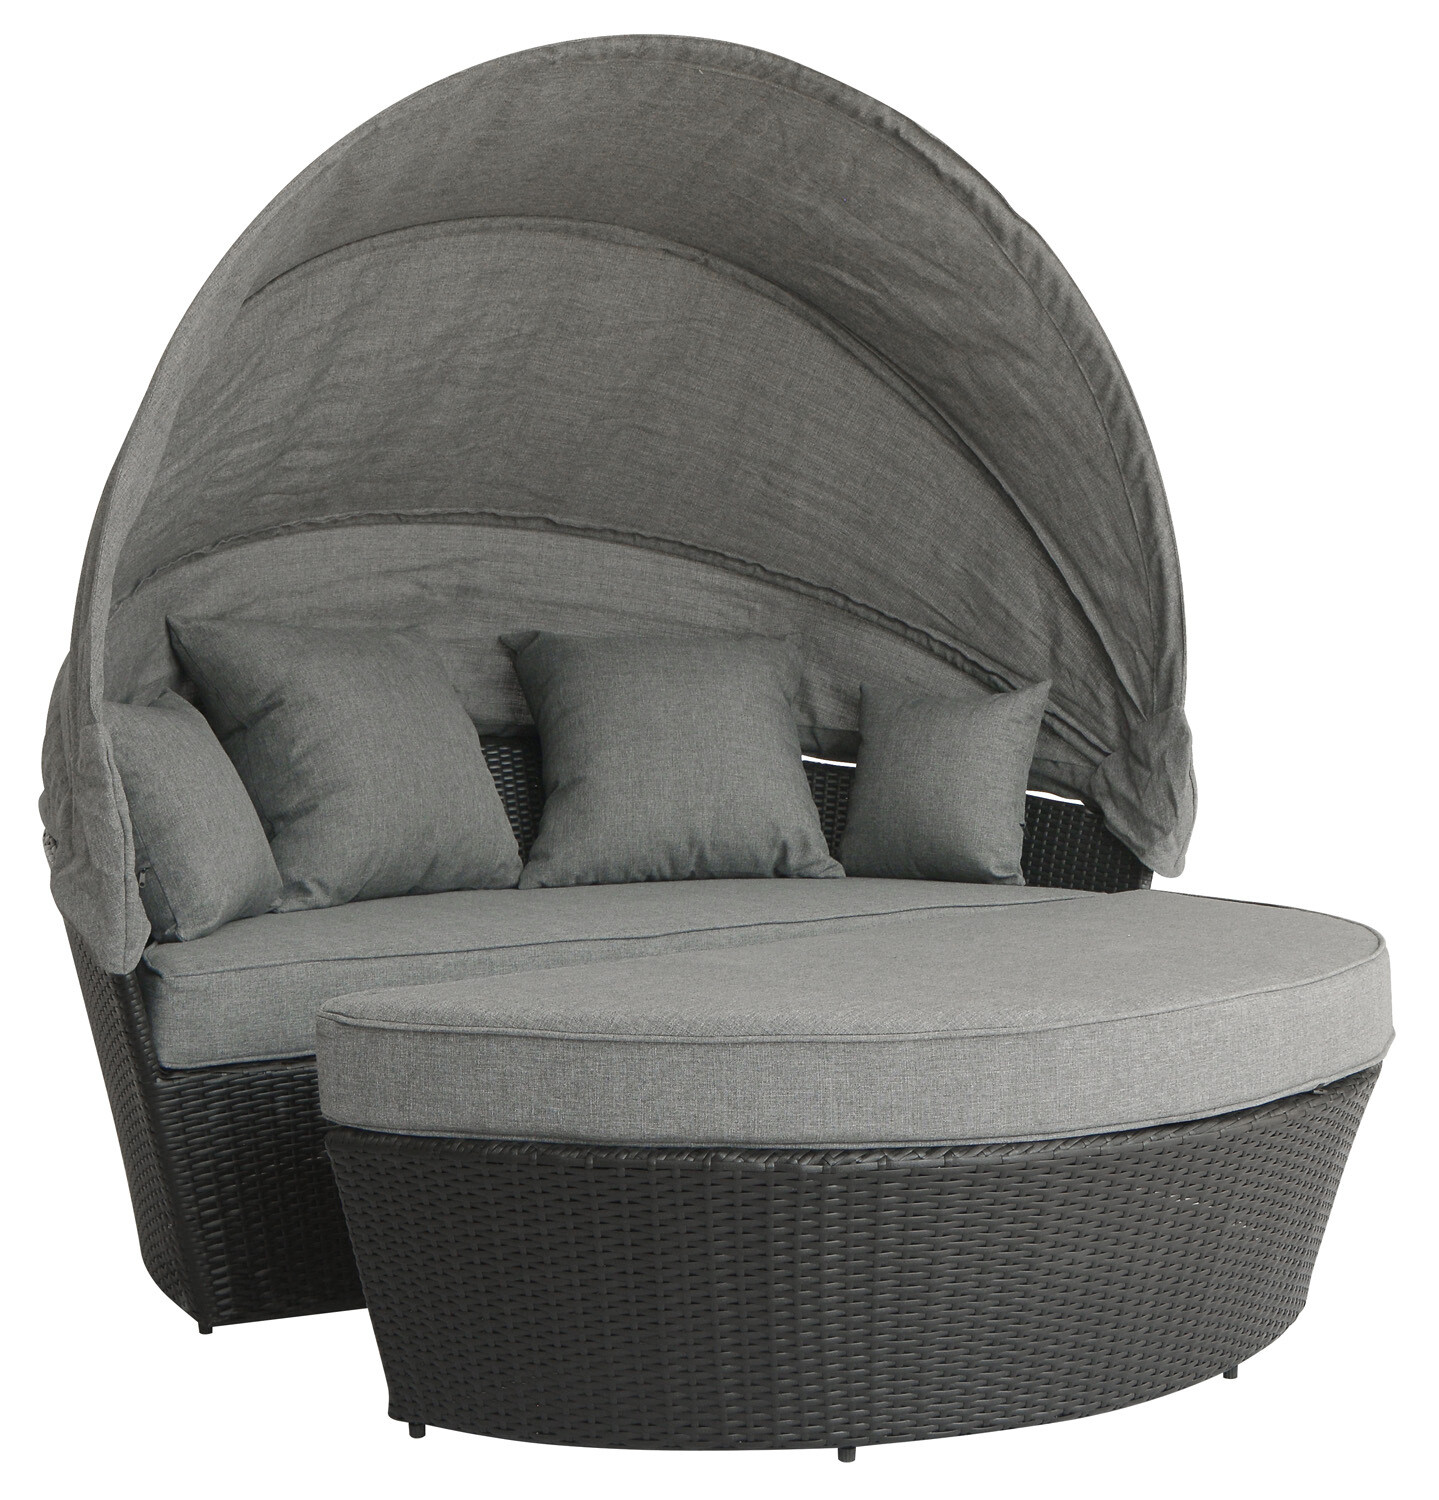 Luna Day Bed with Canopy